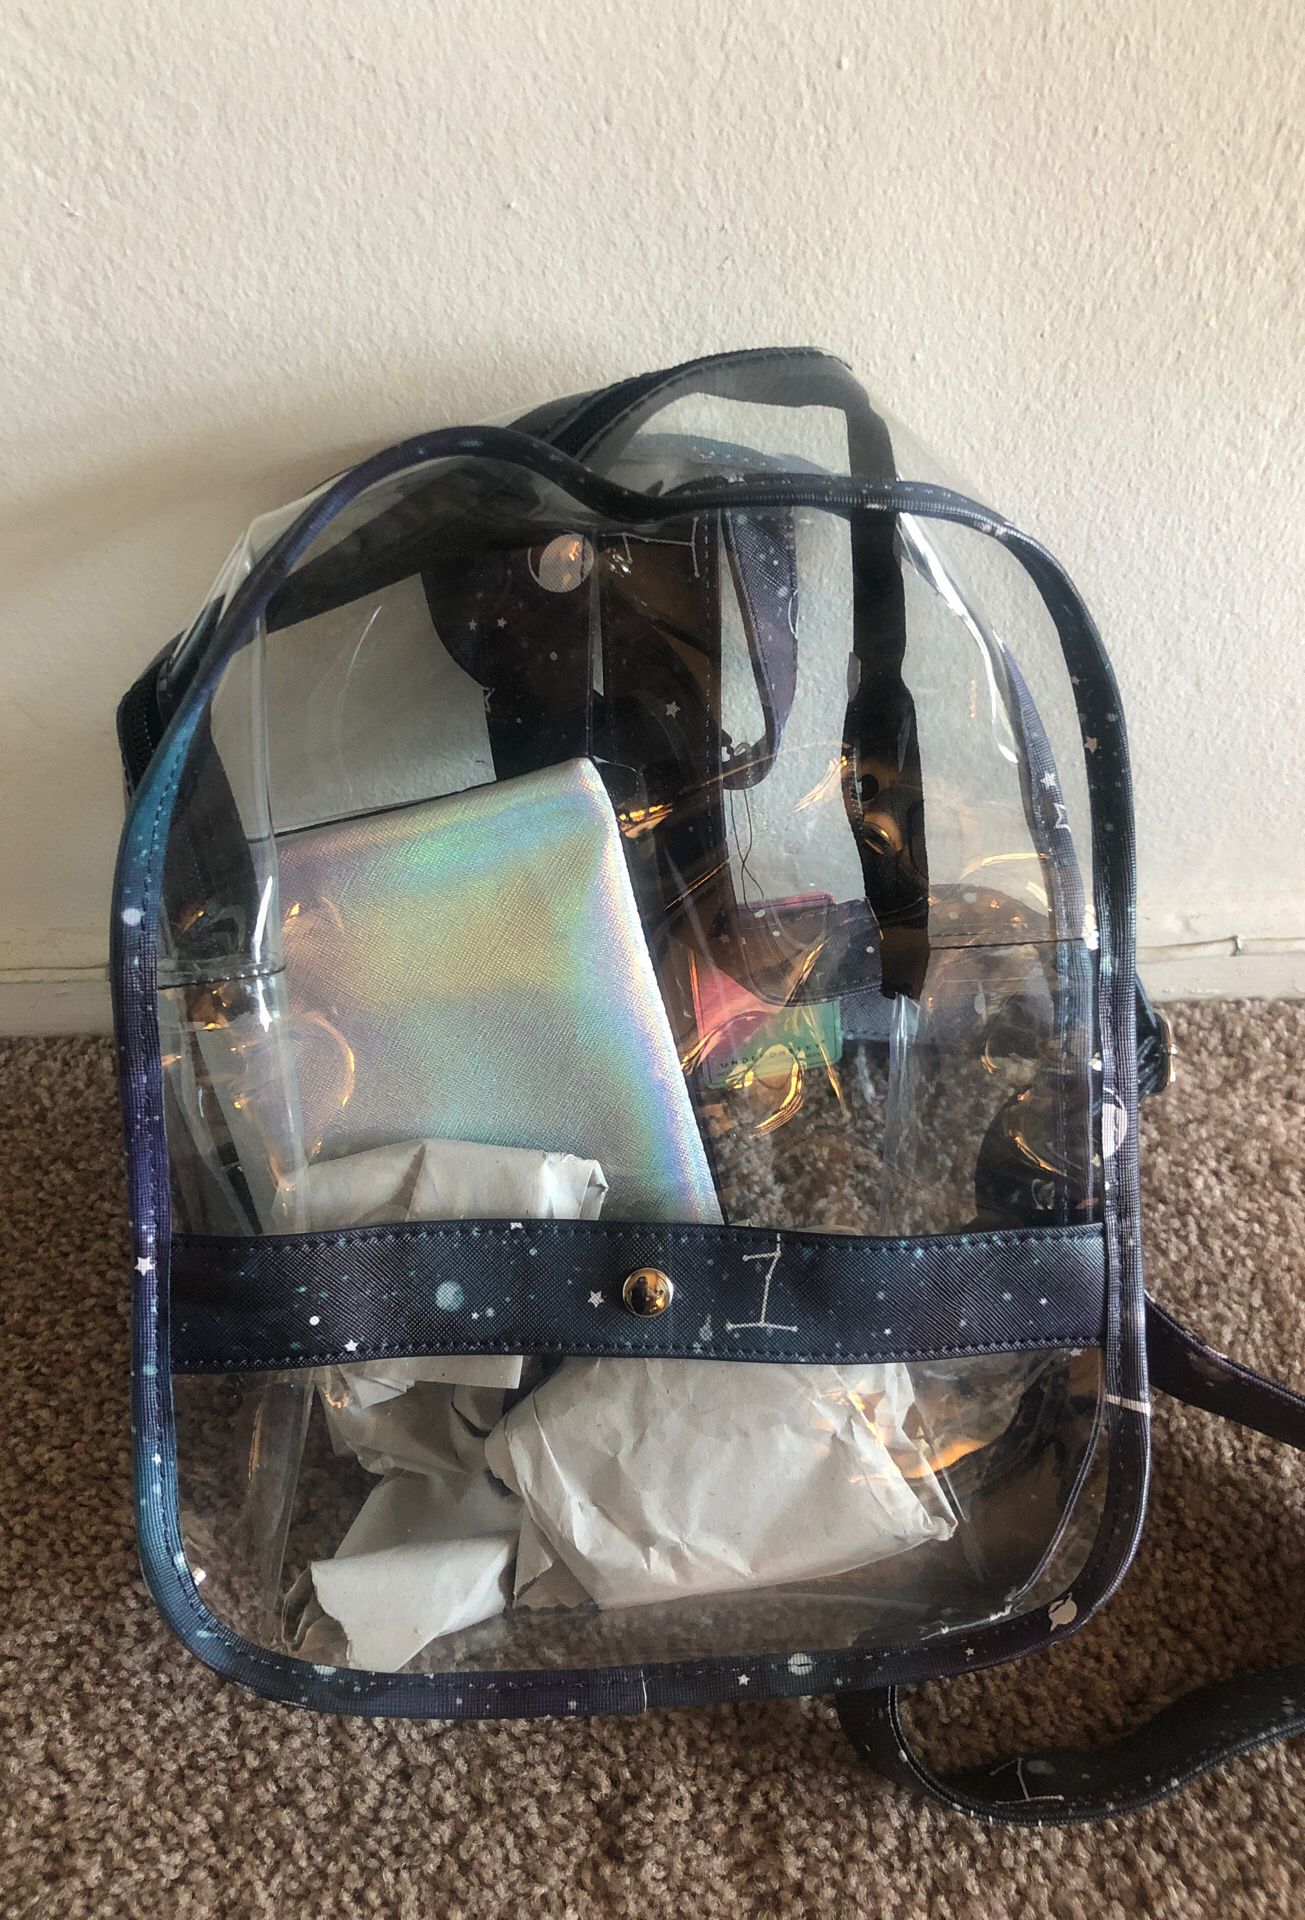 Los Angeles clear see through purse backpack back to school space theme stars ufo sky + wallet journal concerts school